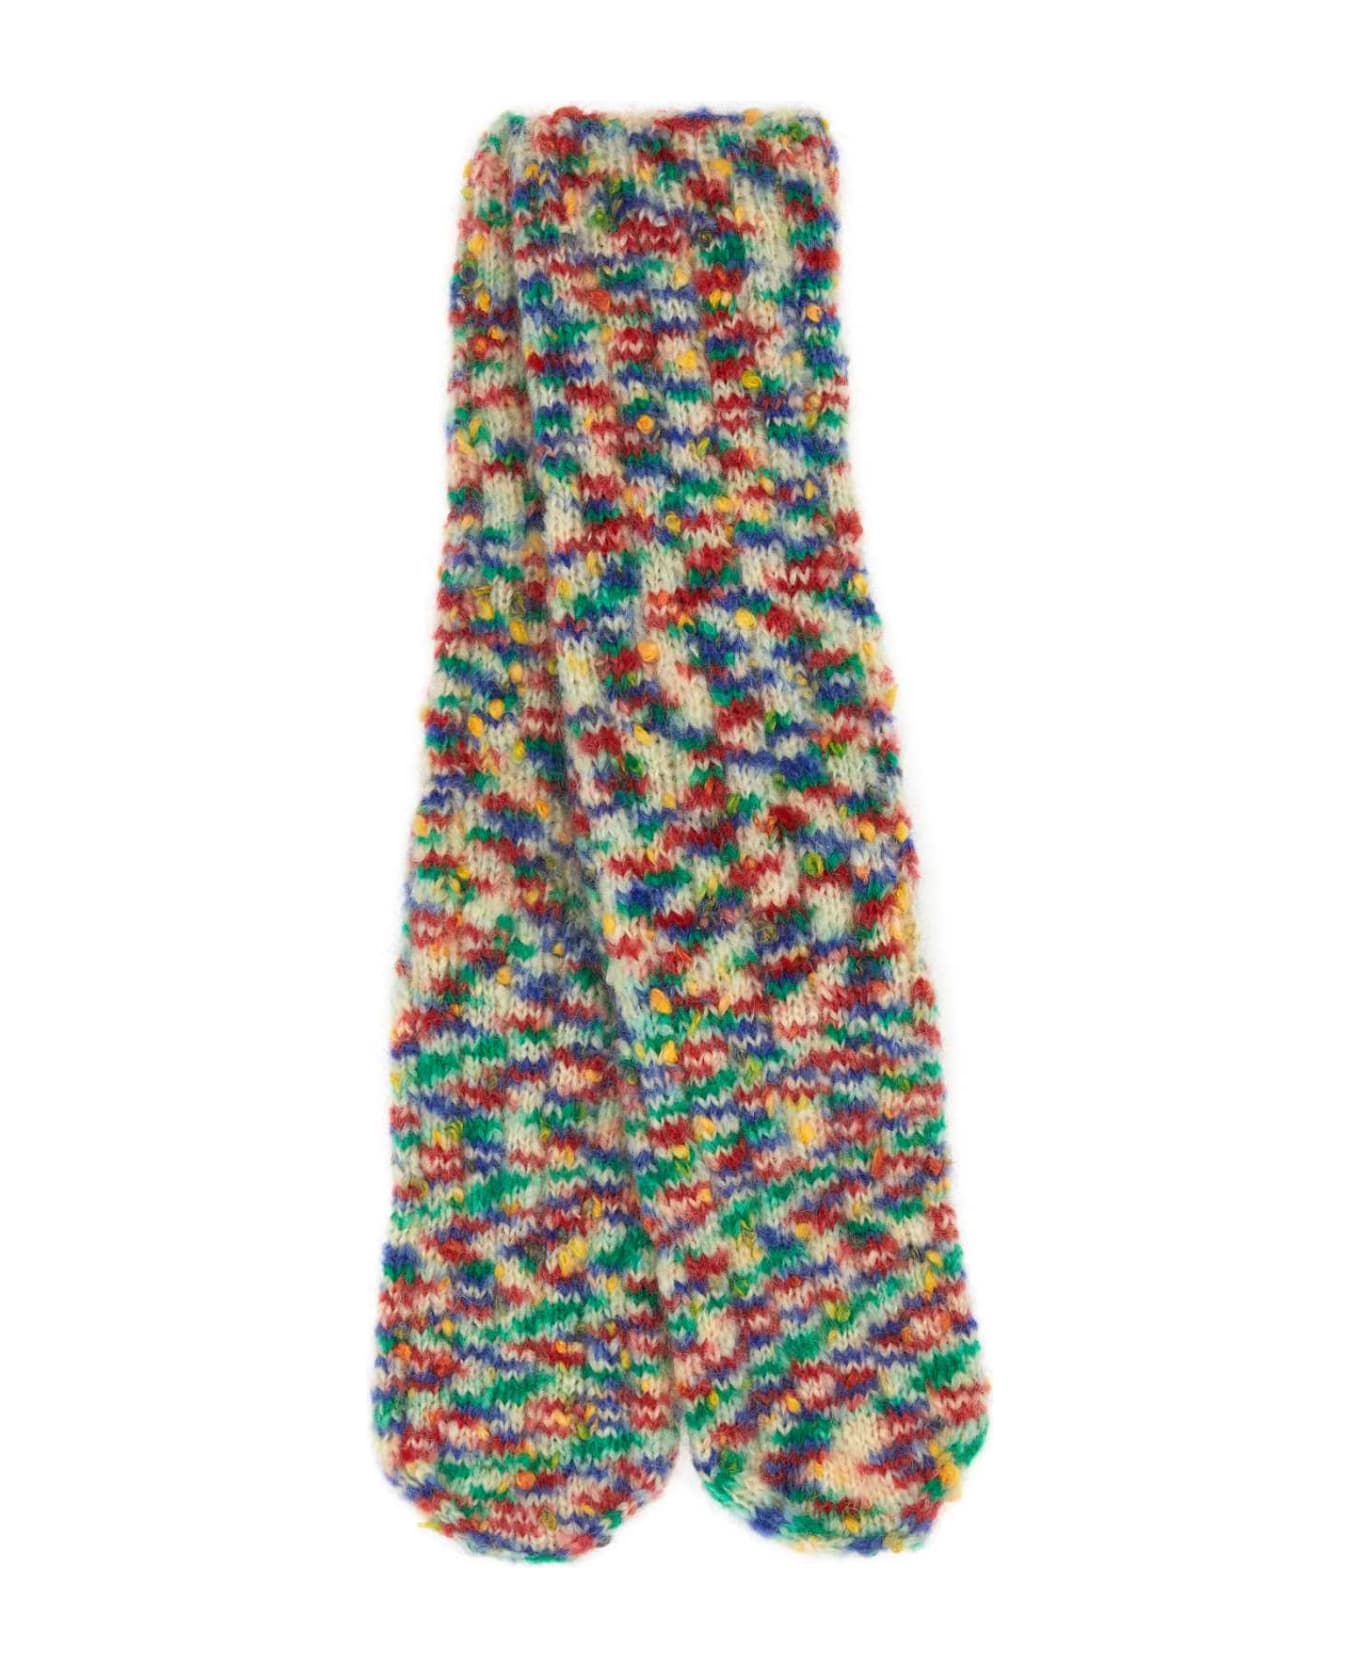 A.P.C. Embroidered Wool Blend Socks - Multicolor